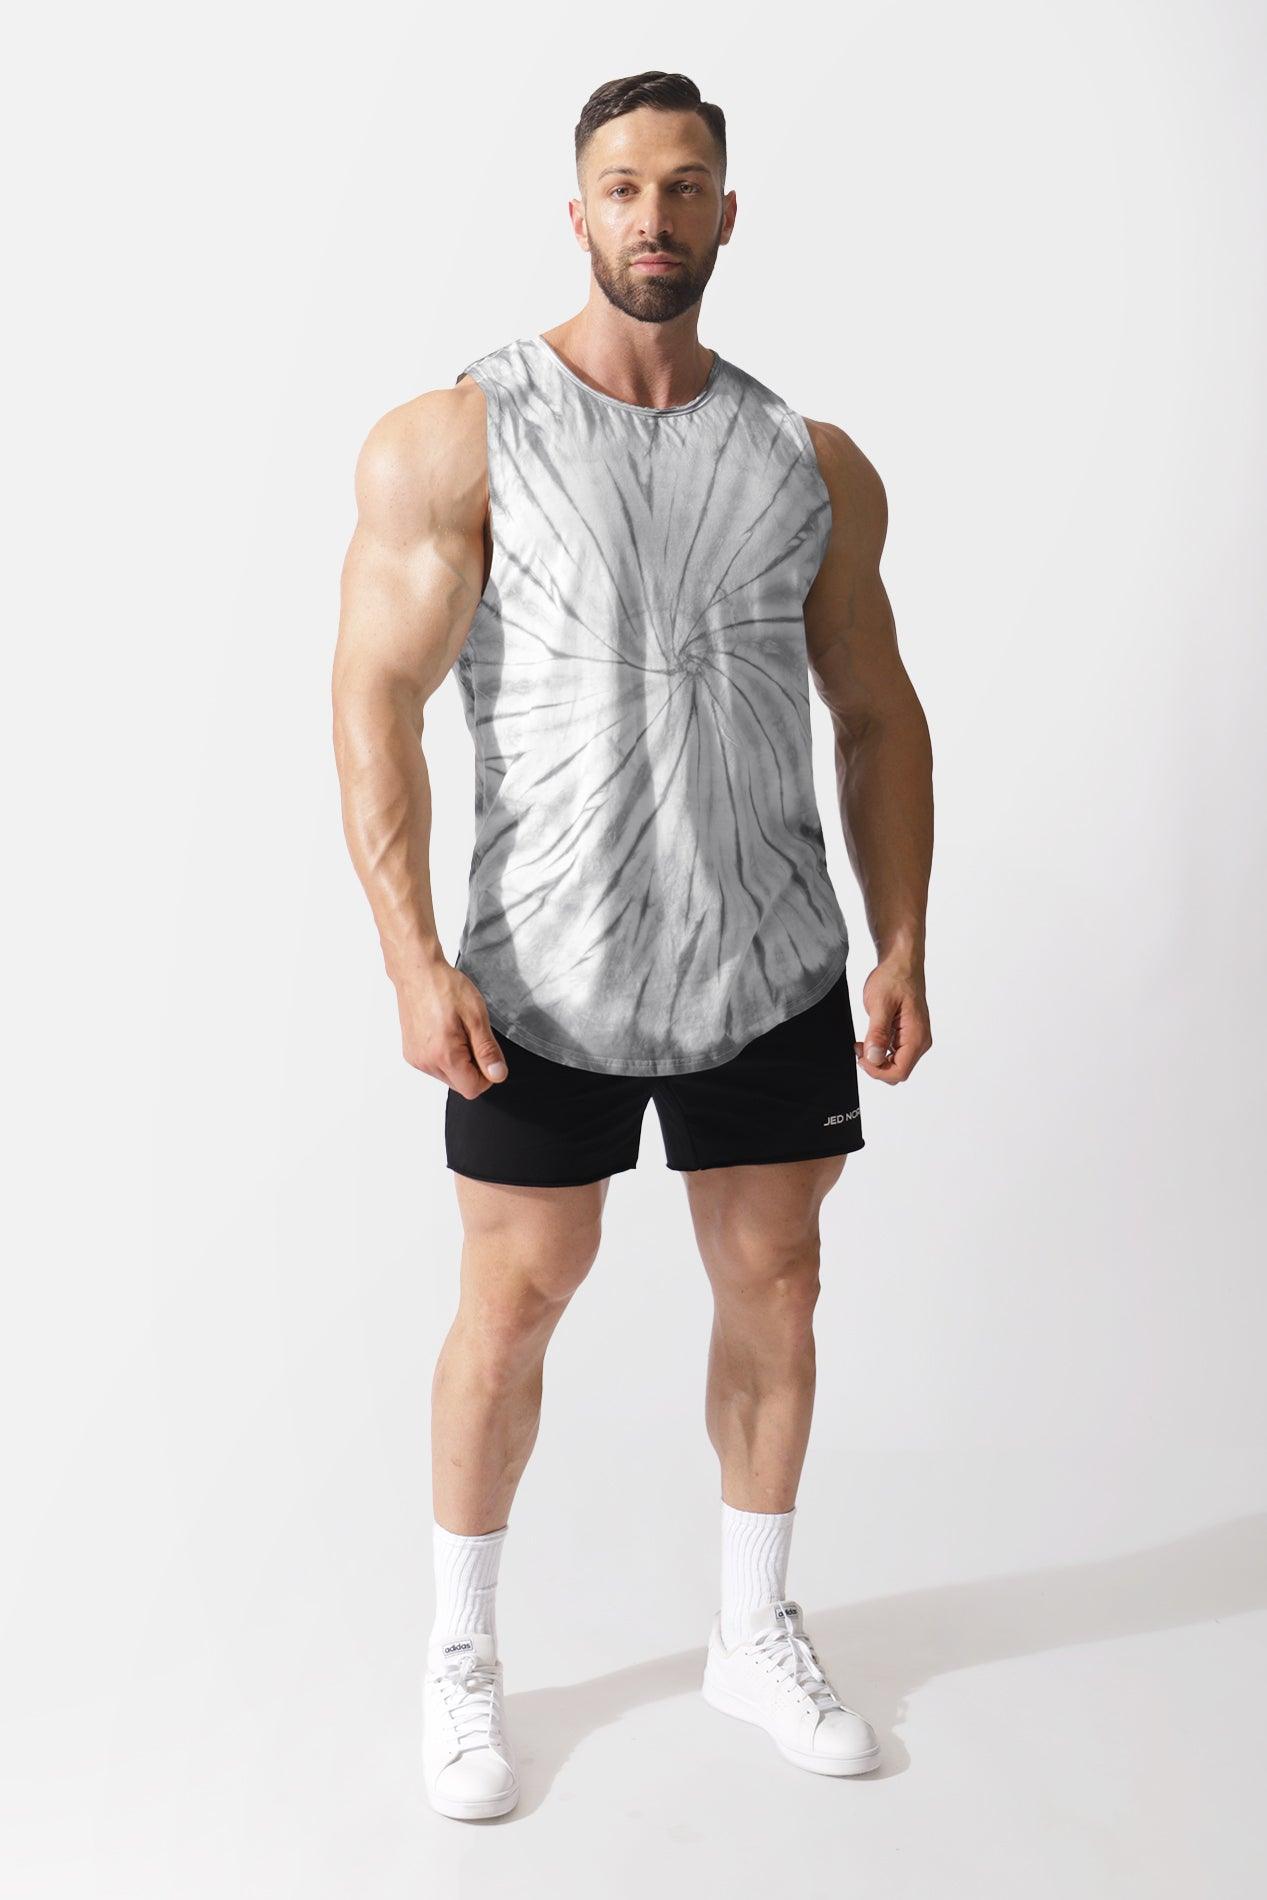 Luxe Flex Training Muscle Tee - Vintage Washed Gray - Jed North Canada